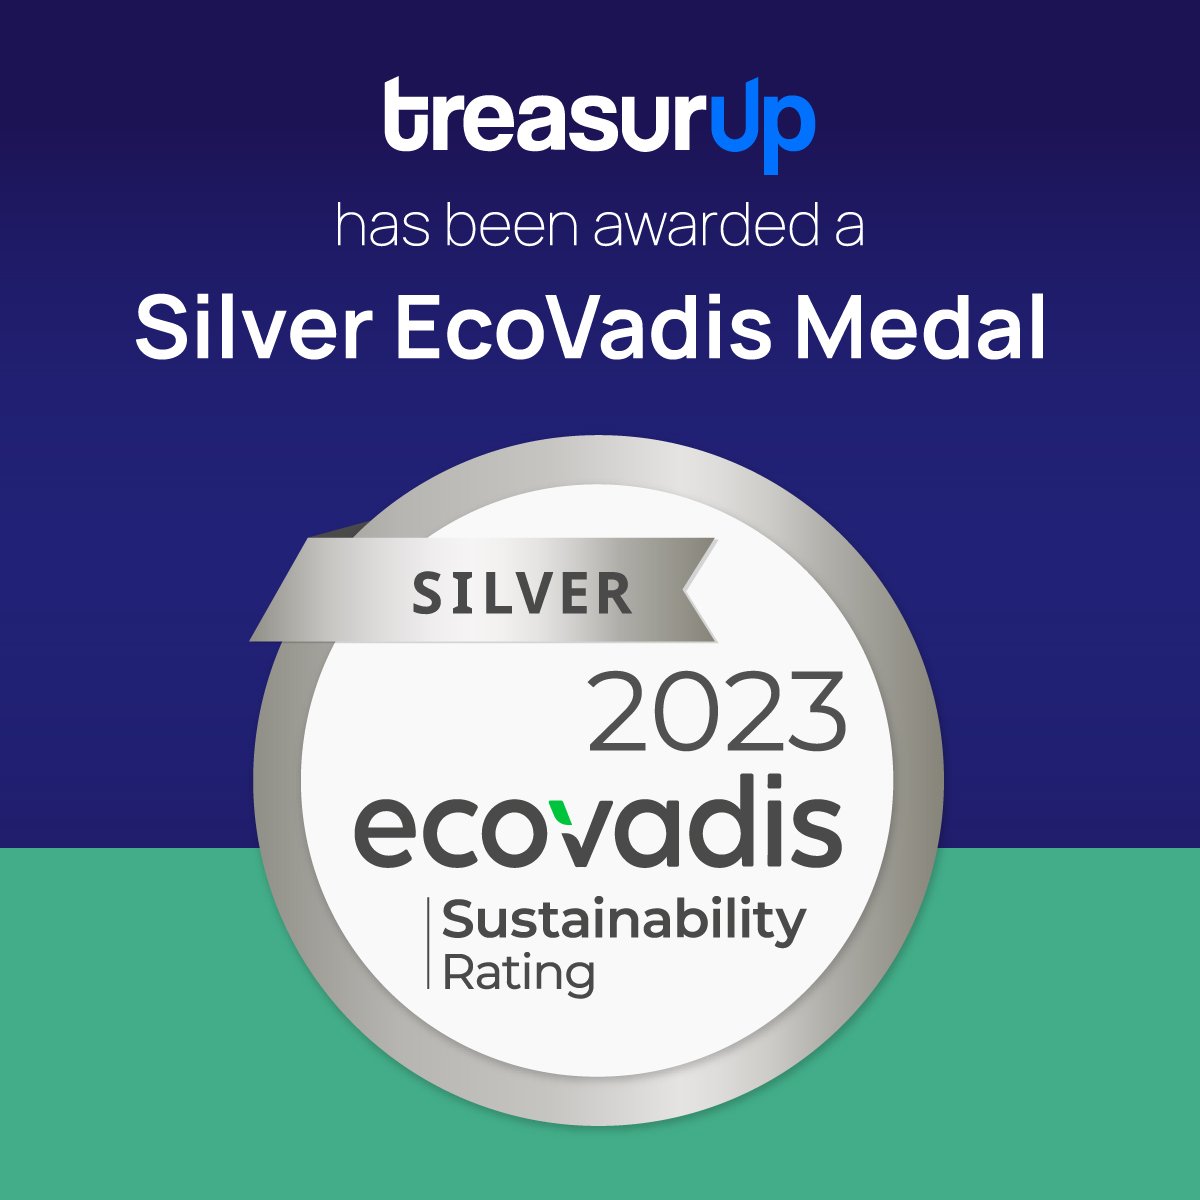 Image of a silver medal with the words "EcoVadis" written at the top and "TreasurUp" at the bottom. The medal represents a sustainability award given by EcoVadis to TreasurUp.